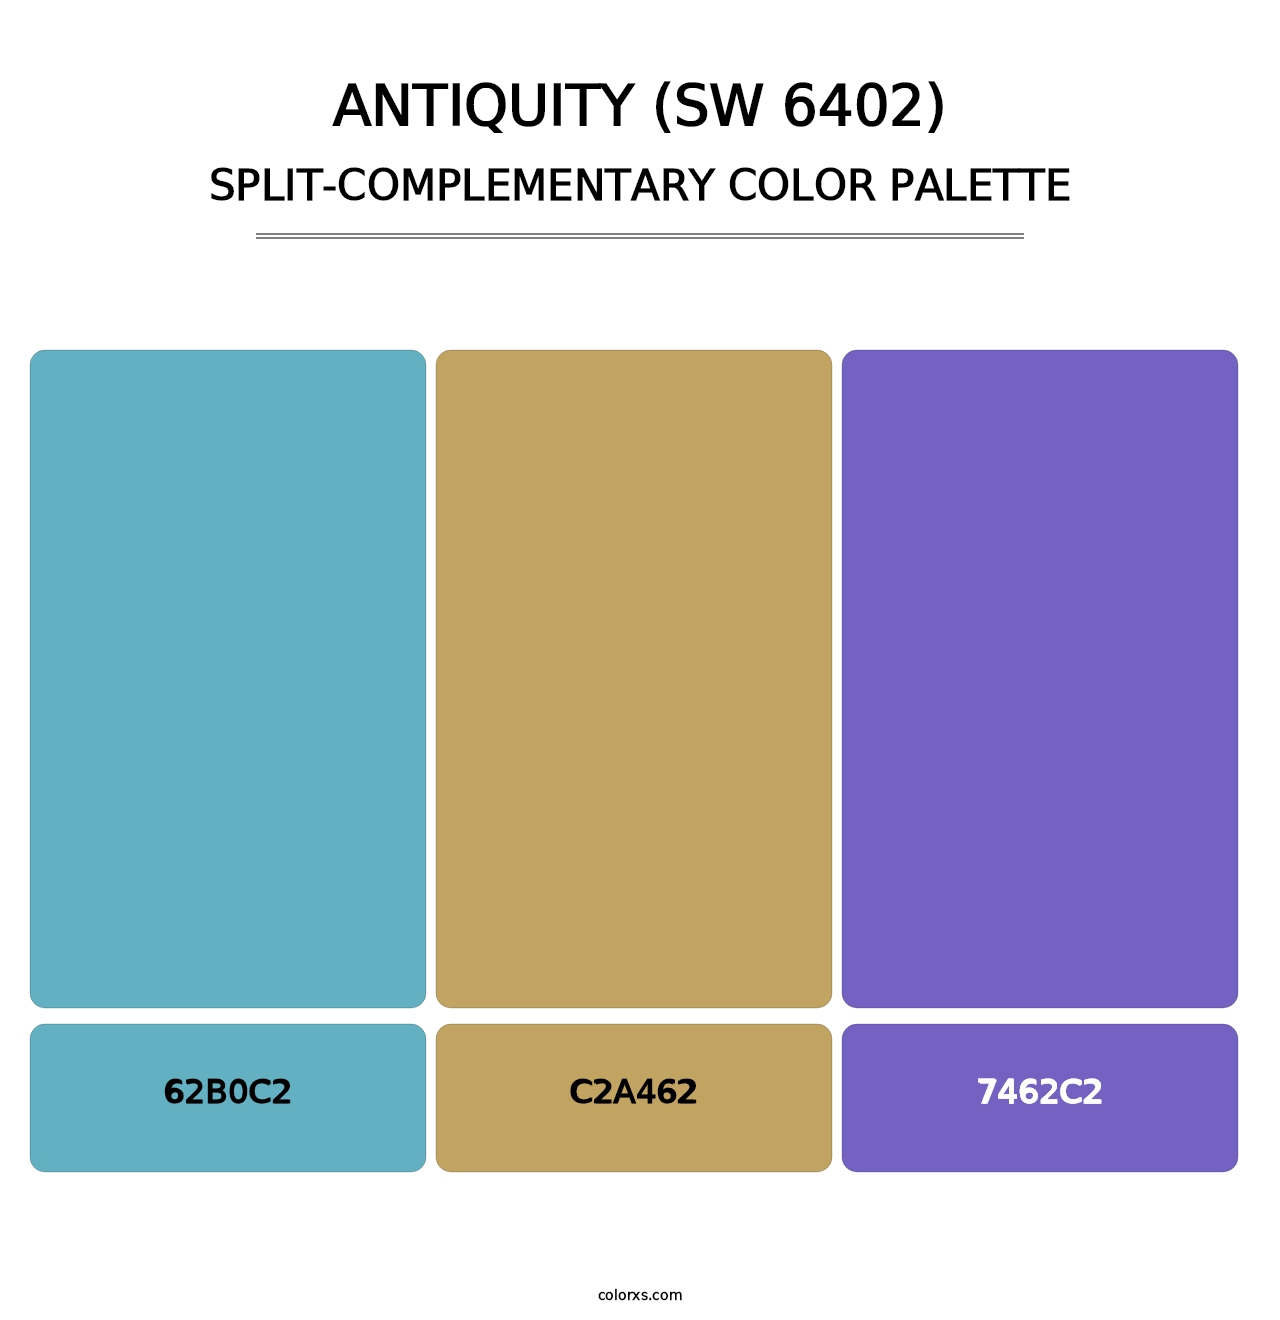 Antiquity (SW 6402) - Split-Complementary Color Palette